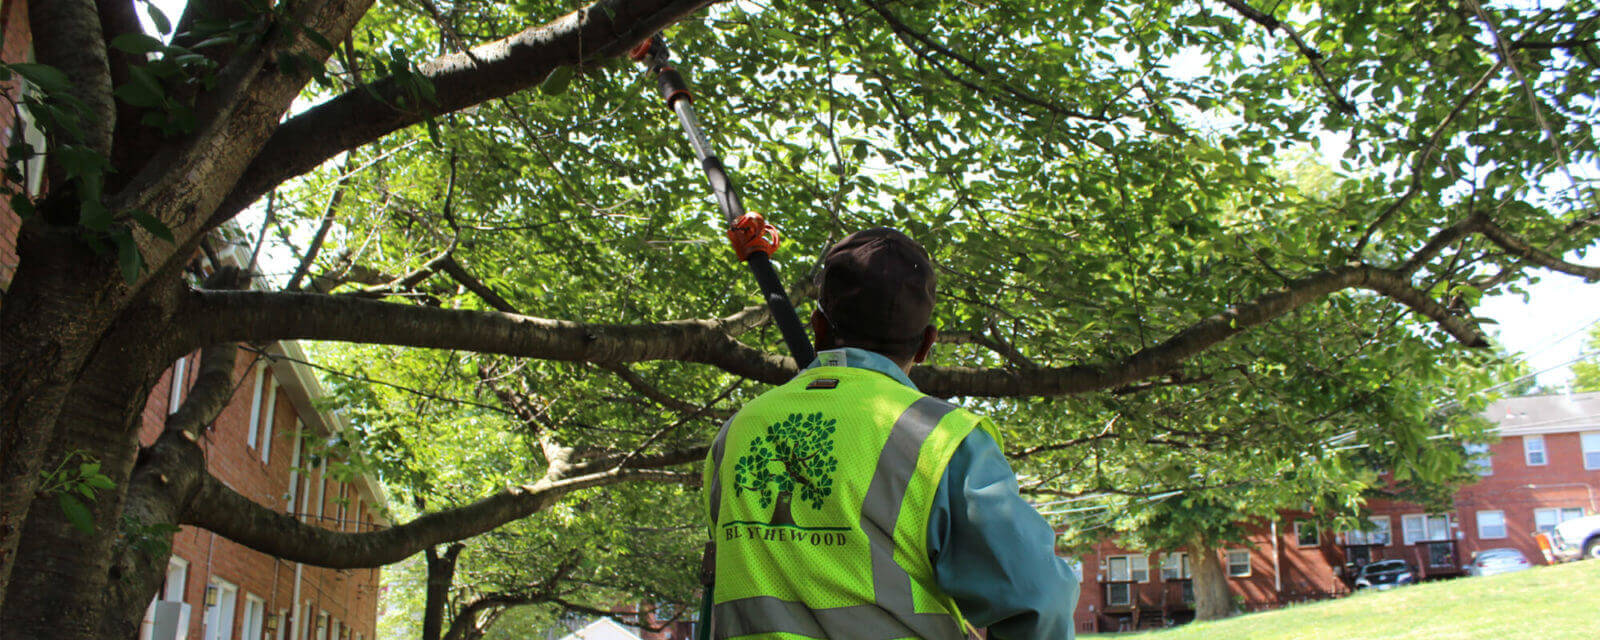 Tree Doctor-Jupiter-Tequesta Tree Trimming and Tree Removal Services-We Offer Tree Trimming Services, Tree Removal, Tree Pruning, Tree Cutting, Residential and Commercial Tree Trimming Services, Storm Damage, Emergency Tree Removal, Land Clearing, Tree Companies, Tree Care Service, Stump Grinding, and we're the Best Tree Trimming Company Near You Guaranteed!